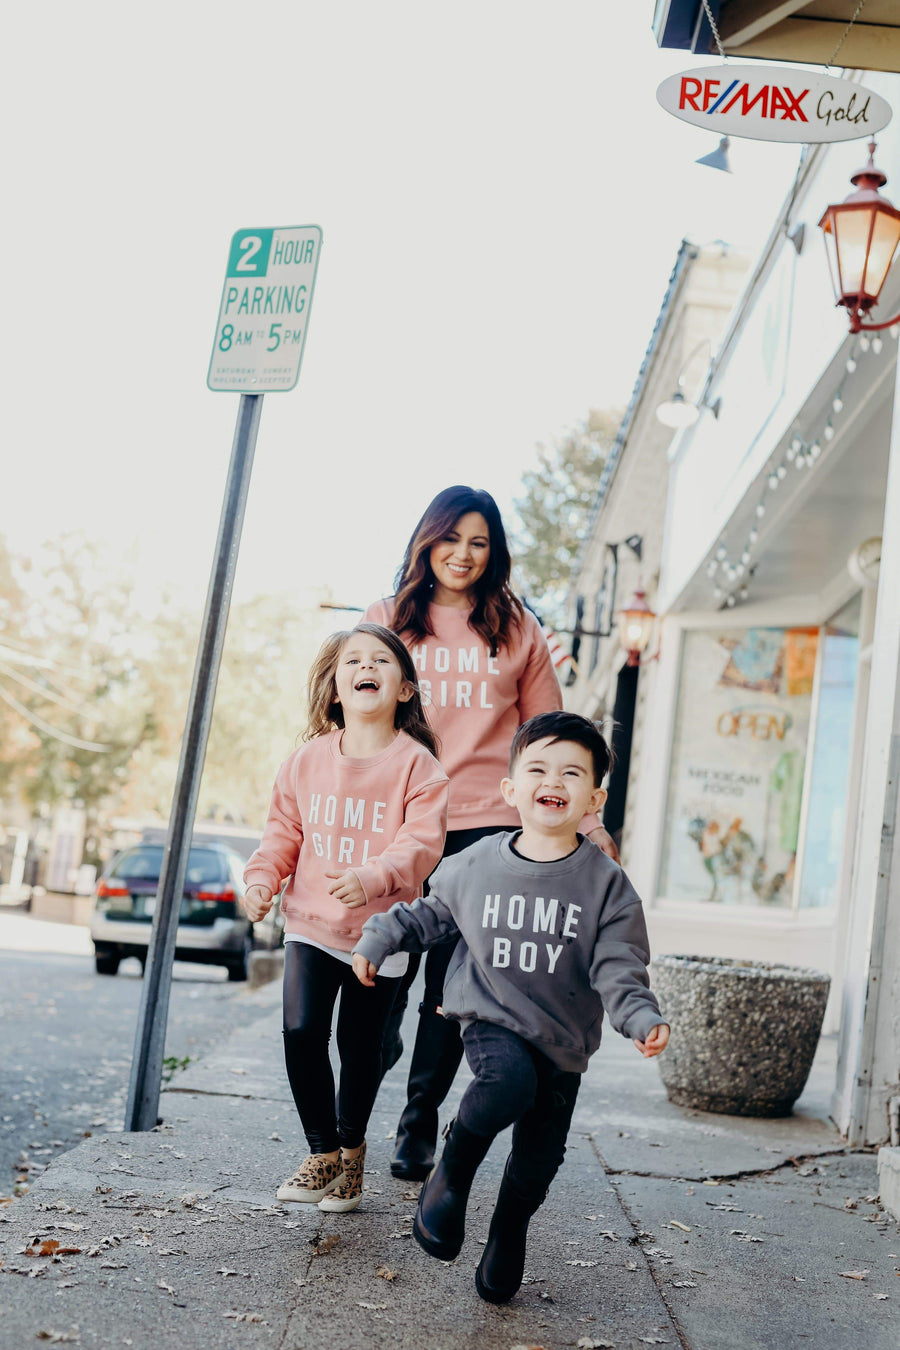 PRESALE LIMITED EDITION - Home Girl And Home Boy Sweatshirts